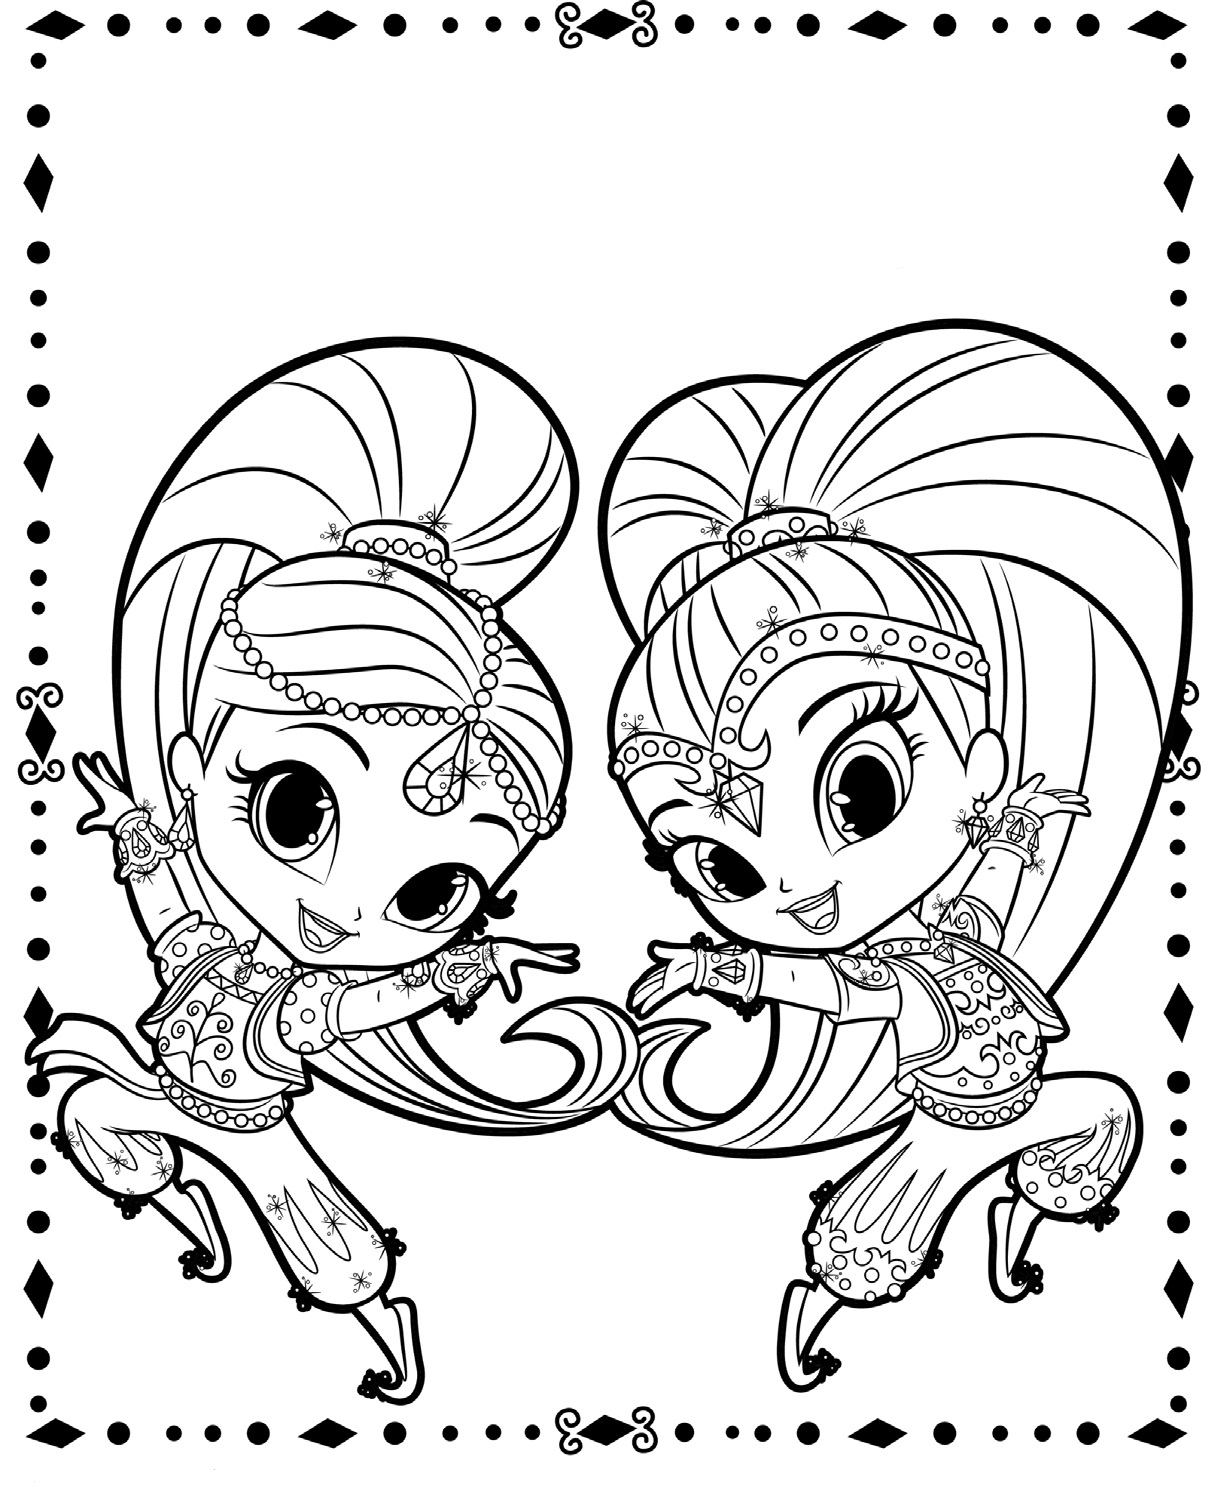 shimmer and shine to color shimmer and shine coloring pages best coloring pages for shine and color shimmer to 